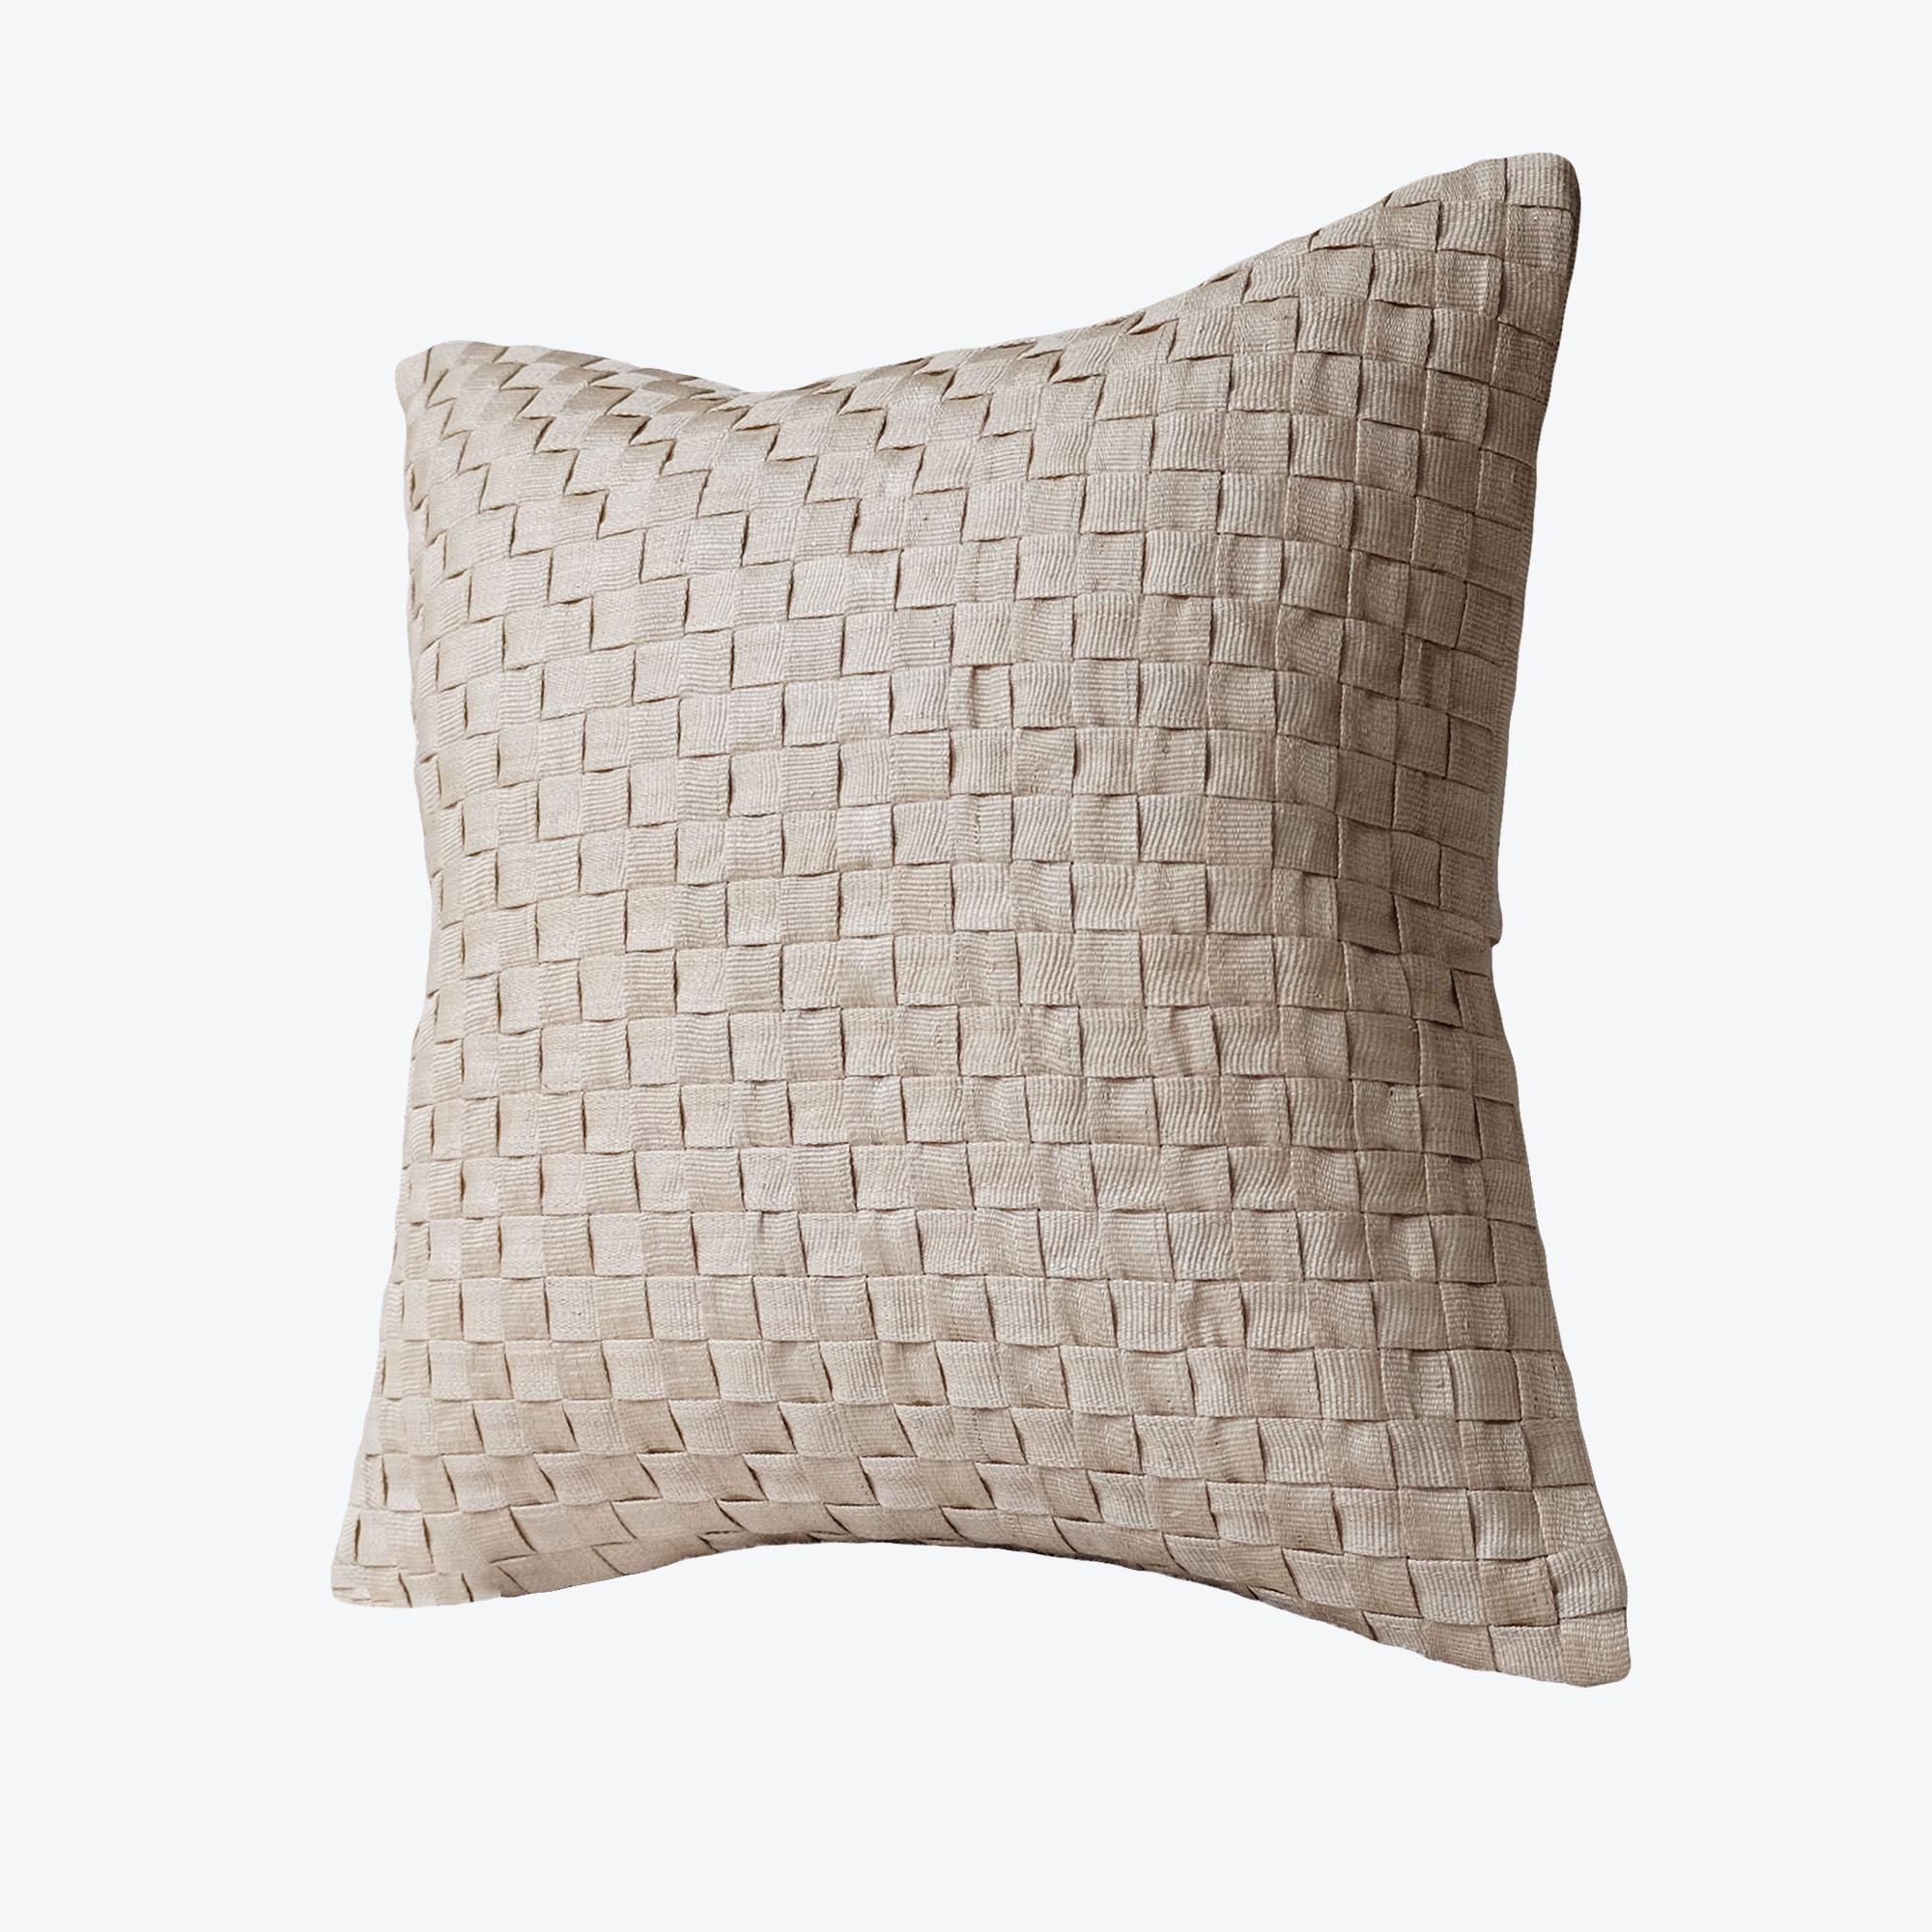 Handcrafted cushion cover made with naturally dyed and delicately woven T’nalak cloth from Abaca fibres and fastened with coconut shell buttons
Colour: light sand

Measures 50 x 50 cm
19.7 x 19.7in
Recommended cushion filler: 61 x 61 cm / 24 x